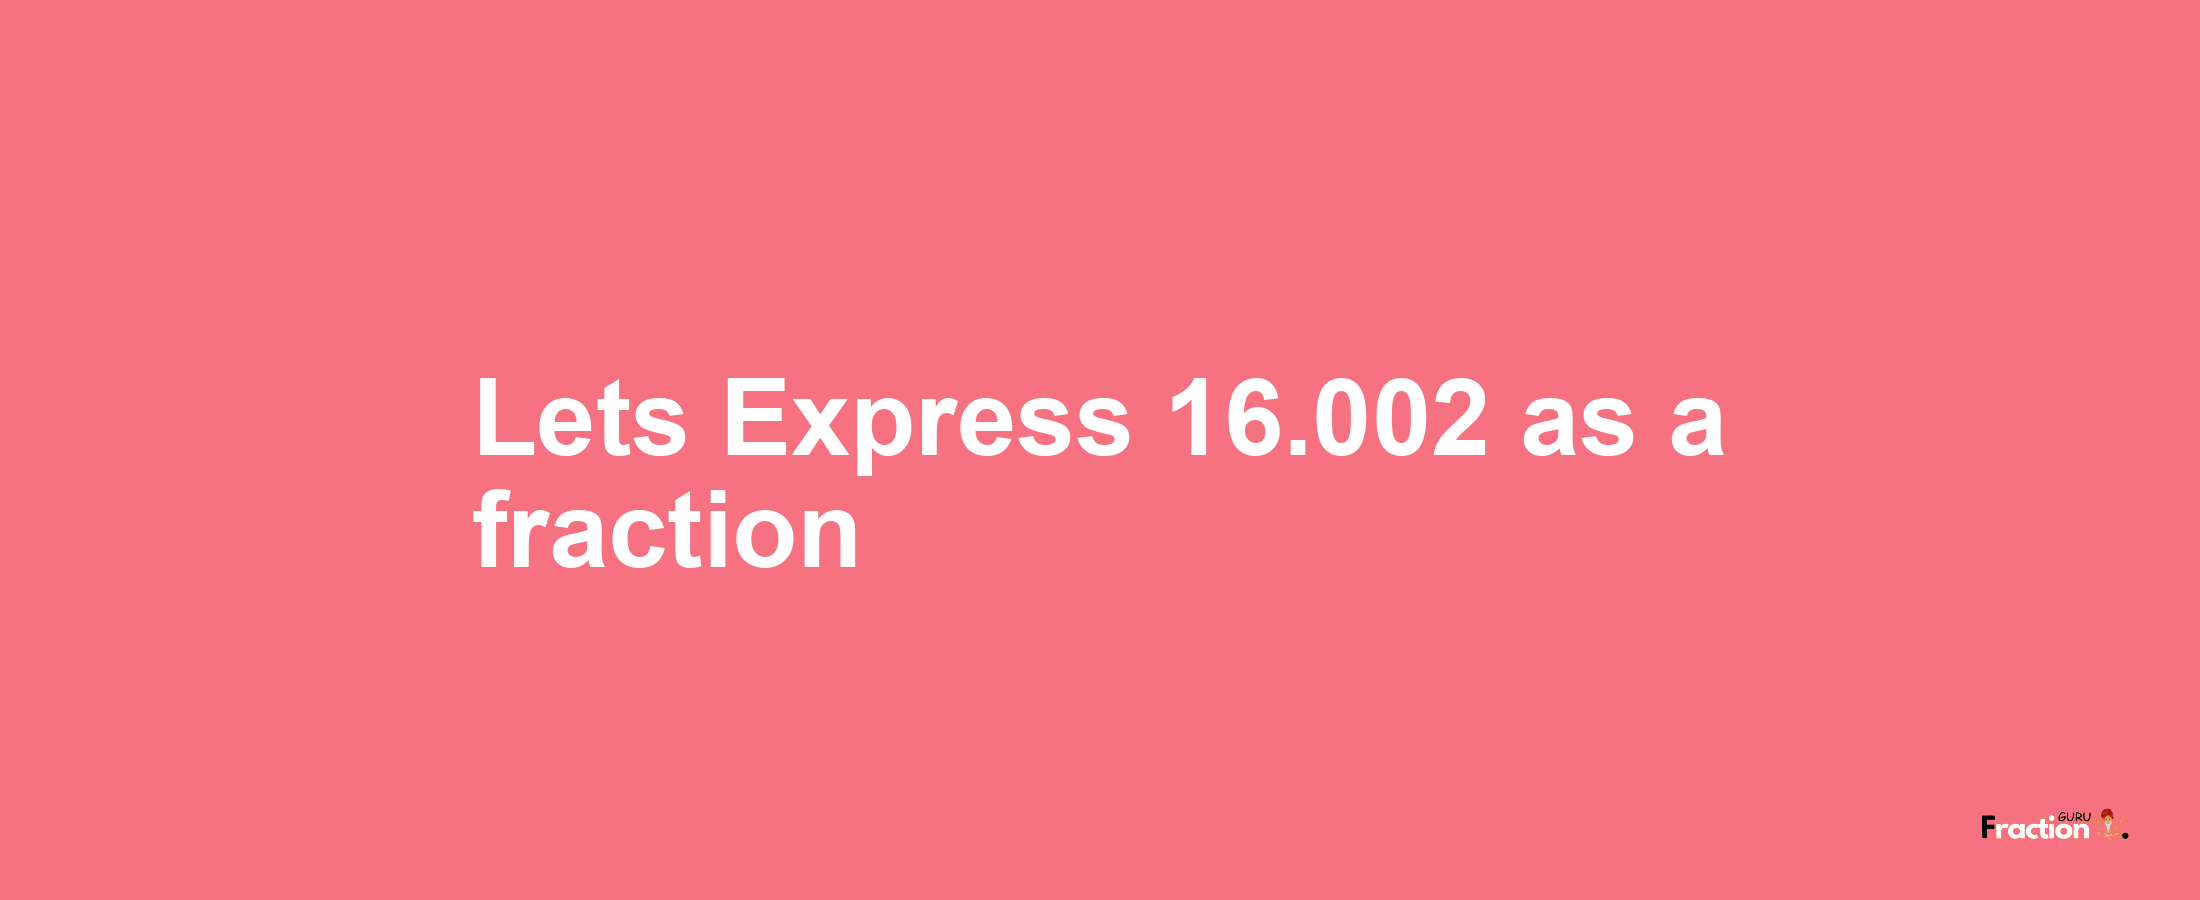 Lets Express 16.002 as afraction